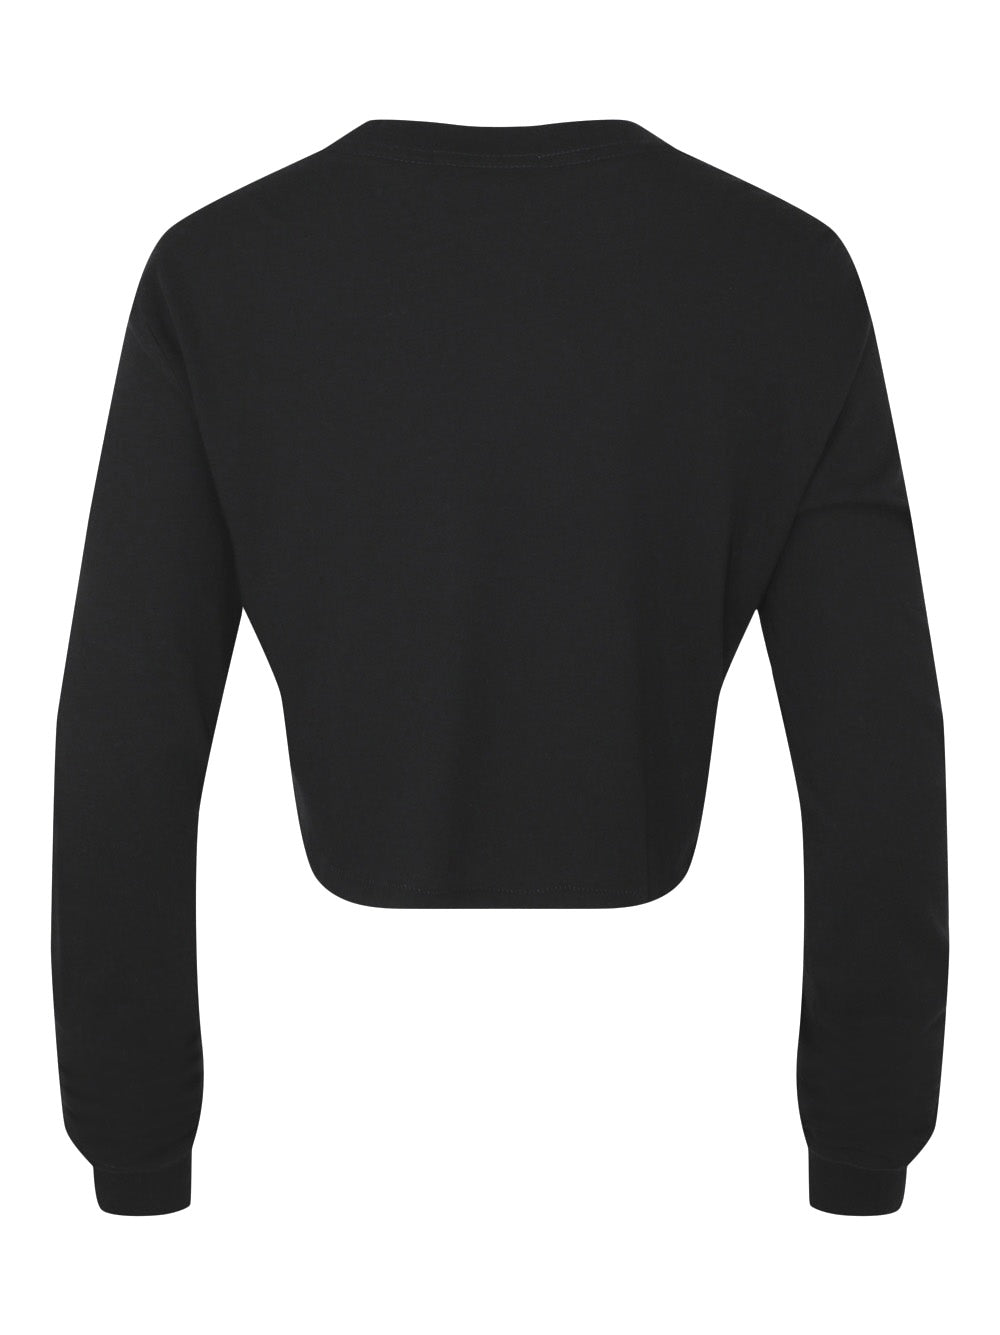 The Cropped Long Sleeve Thermal by Eterne– ÉTERNE